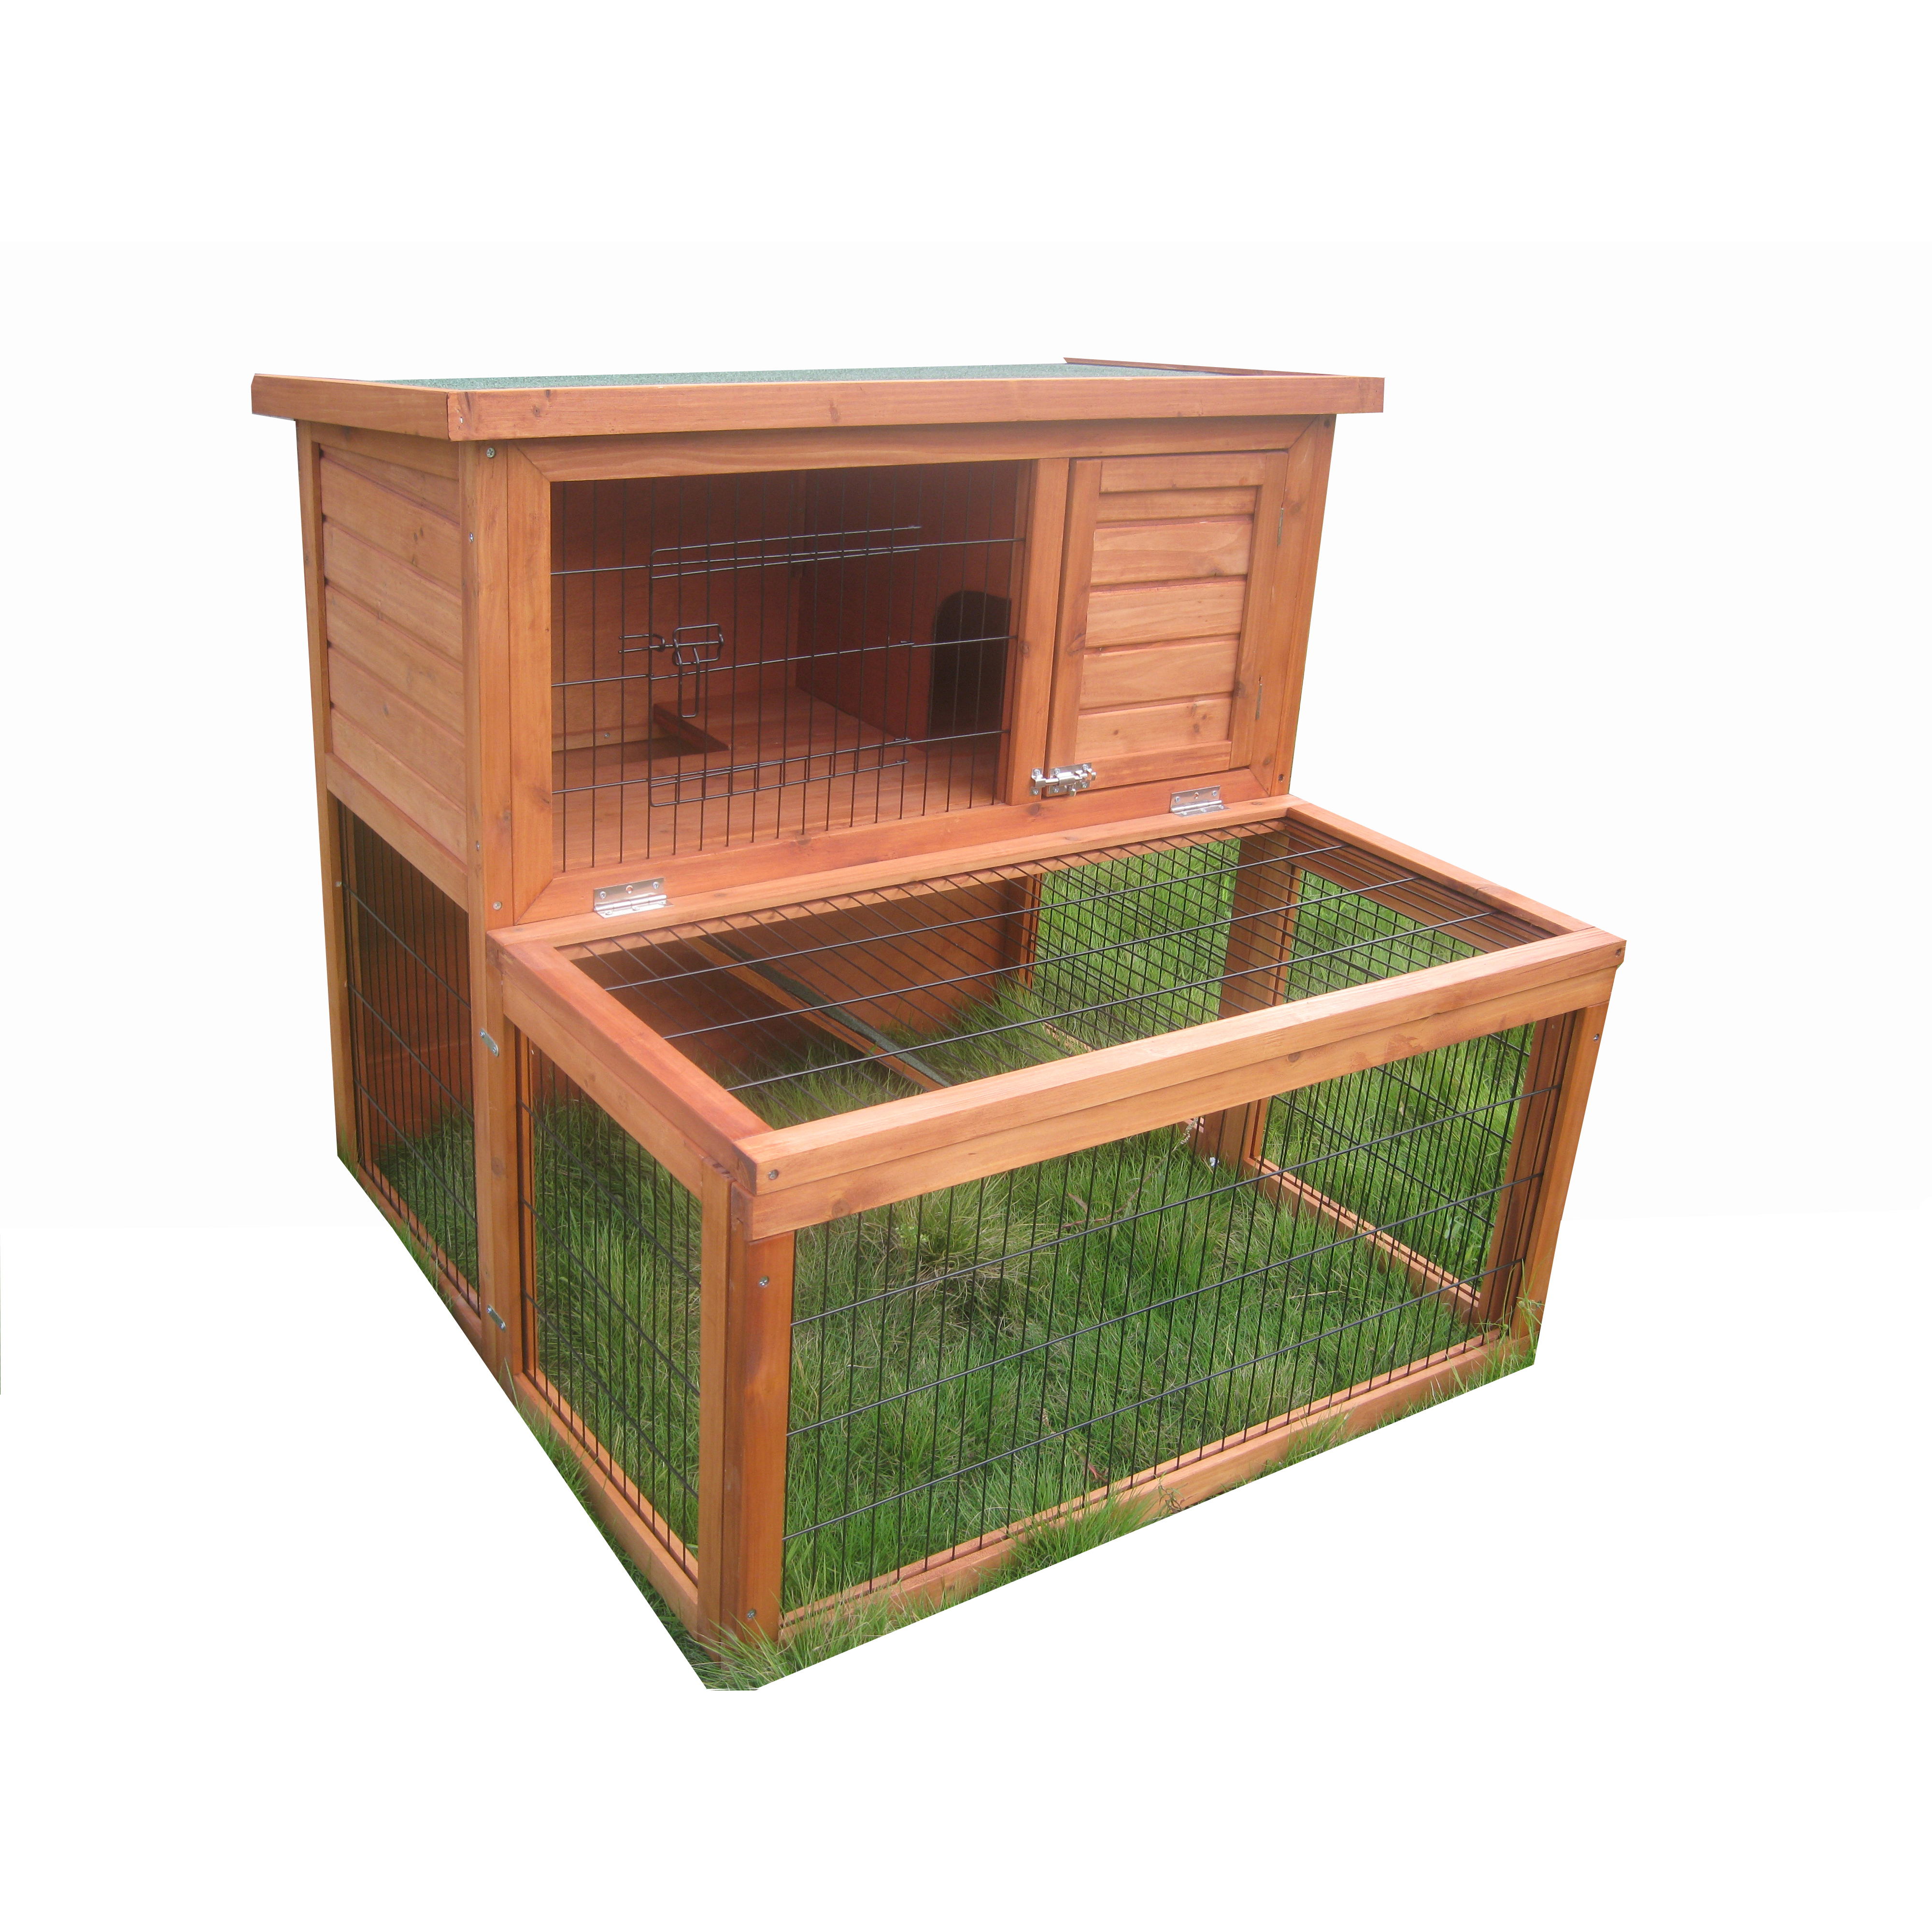 Fixed Competitive Price Dog Kennels For Sale -
 cheap Hutch Cover Indoor Industrial commercial rabbit breeding cages – Easy